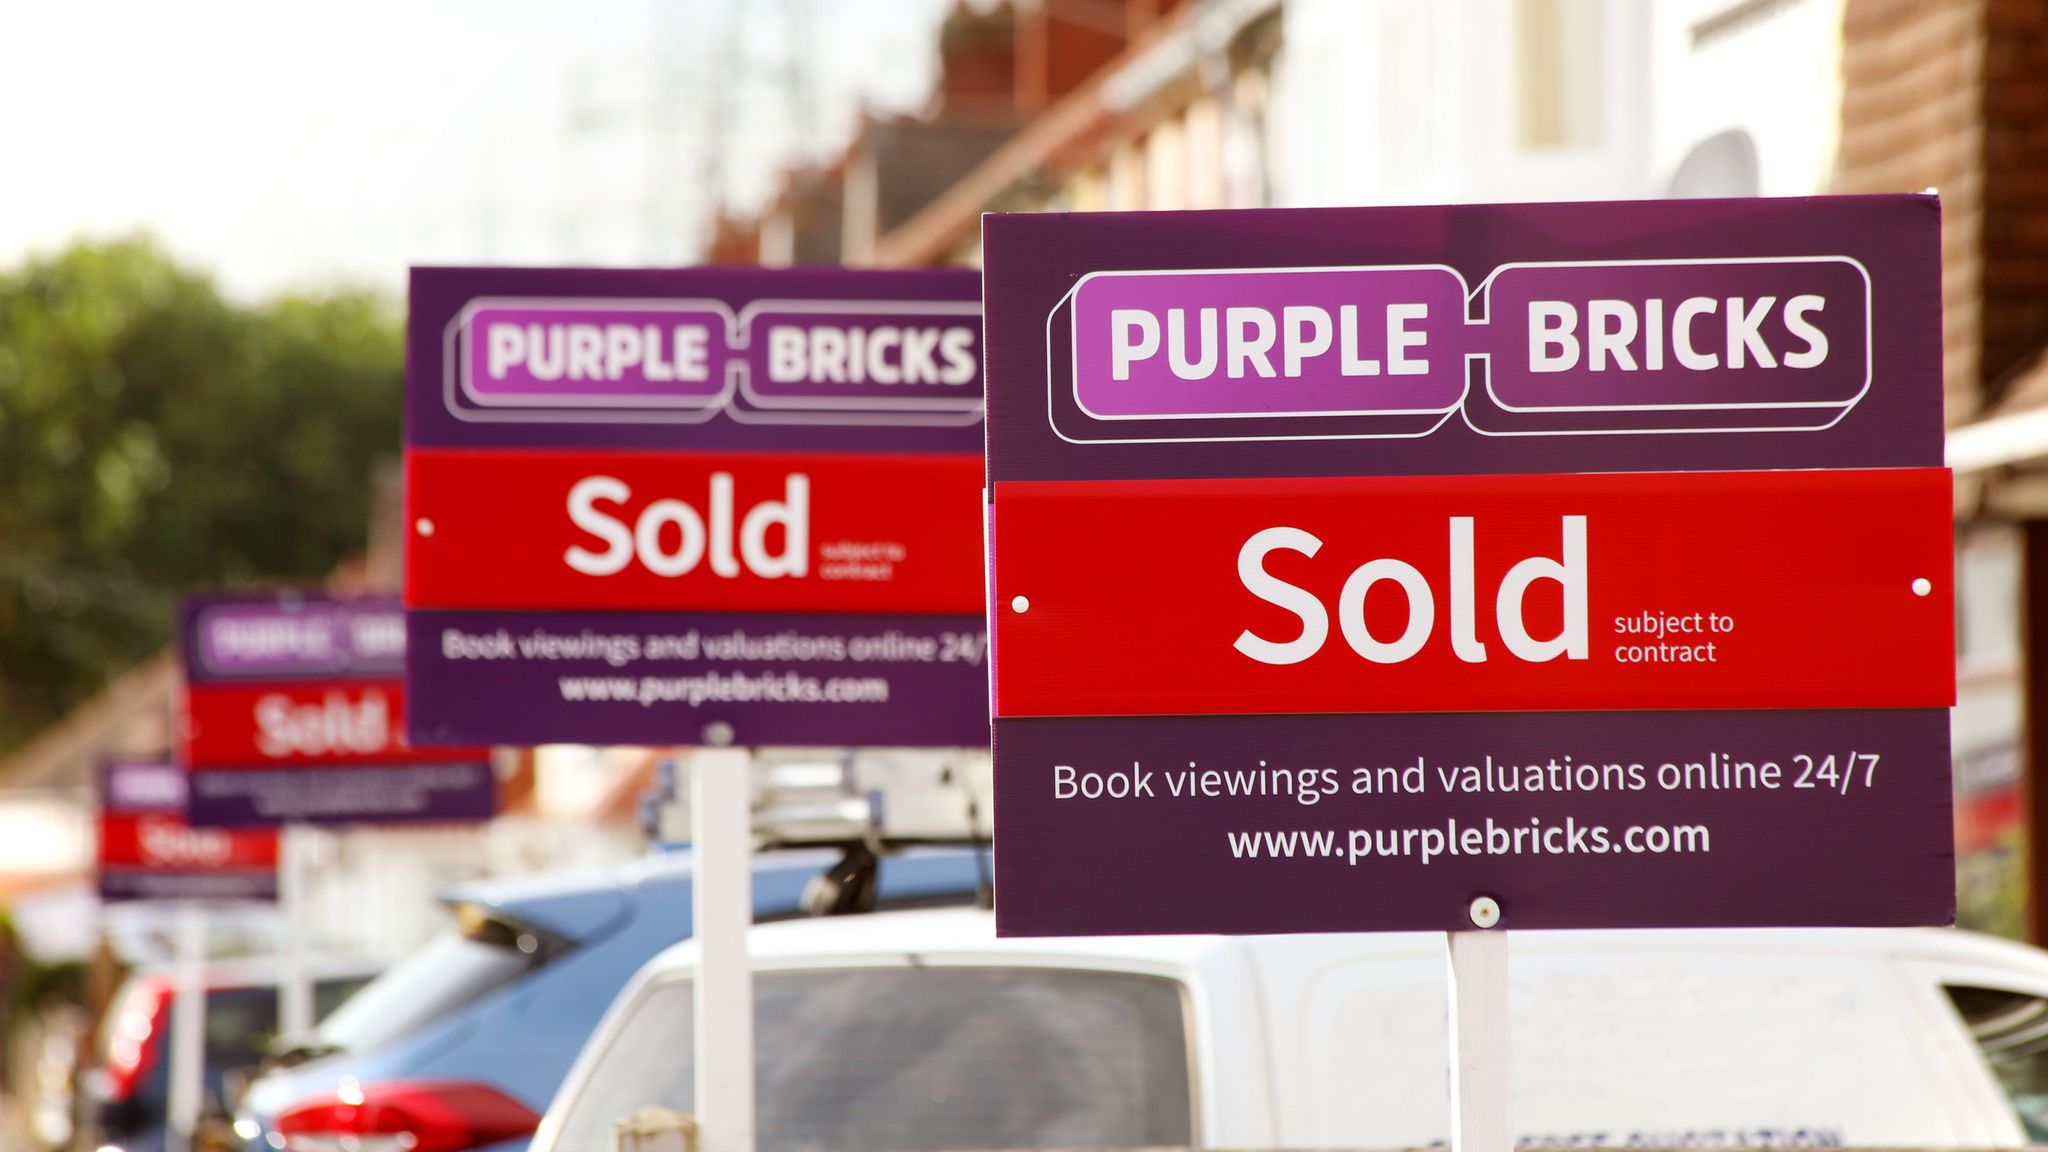 New Purplebricks owner to Strike out chunk of workforce